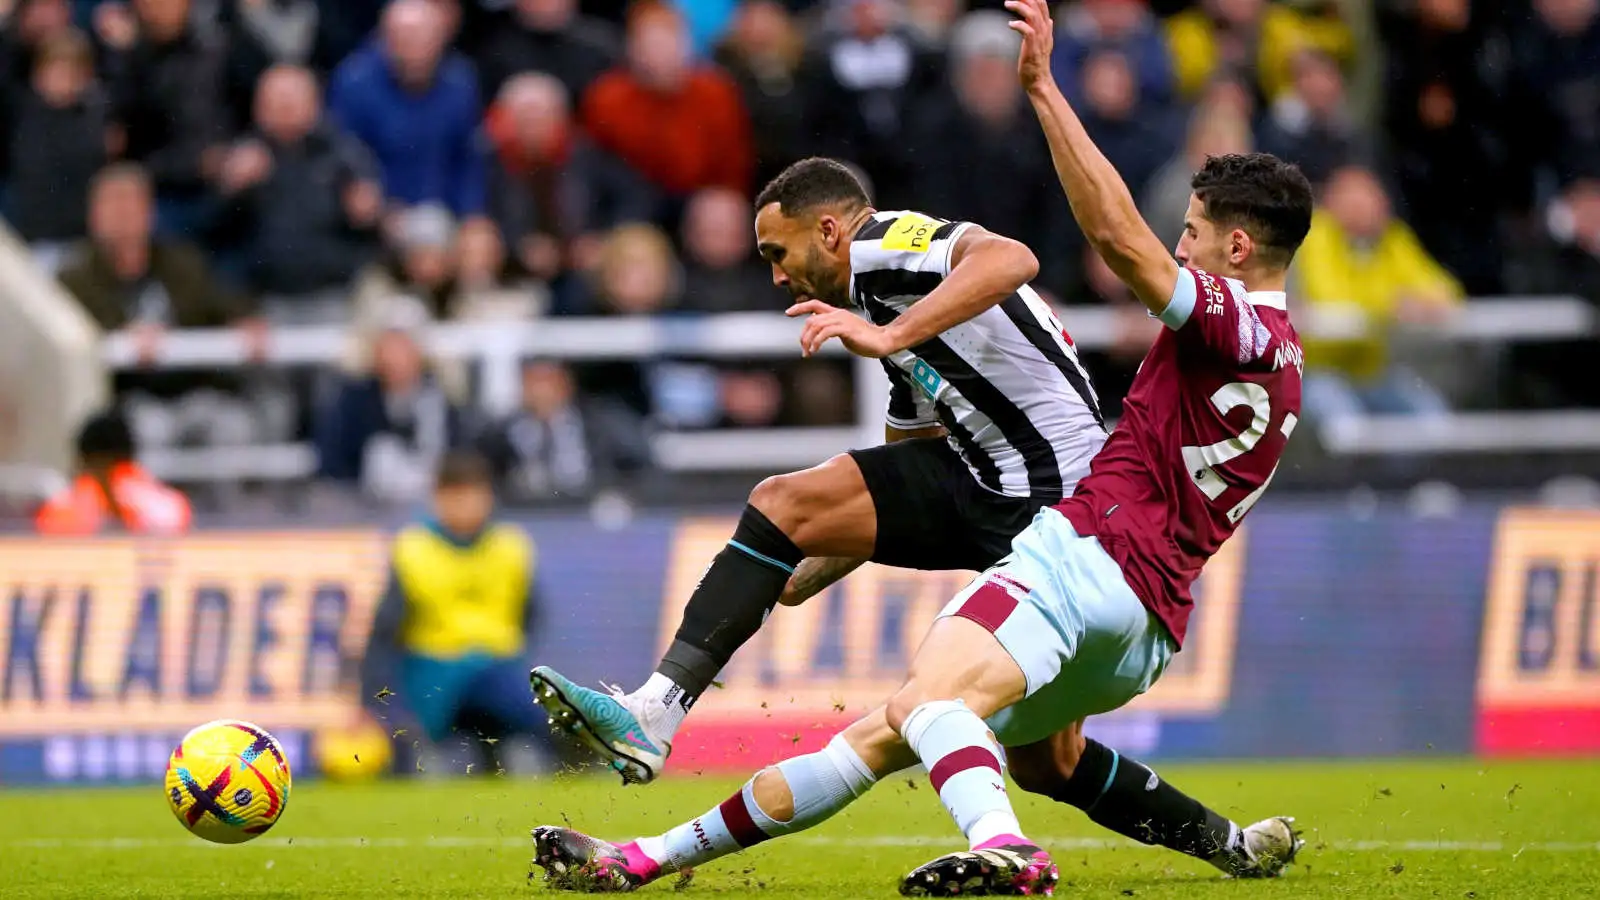 Newcastle - West Ham Match Live: Schedule, TV Broadcast and Streaming - Media7